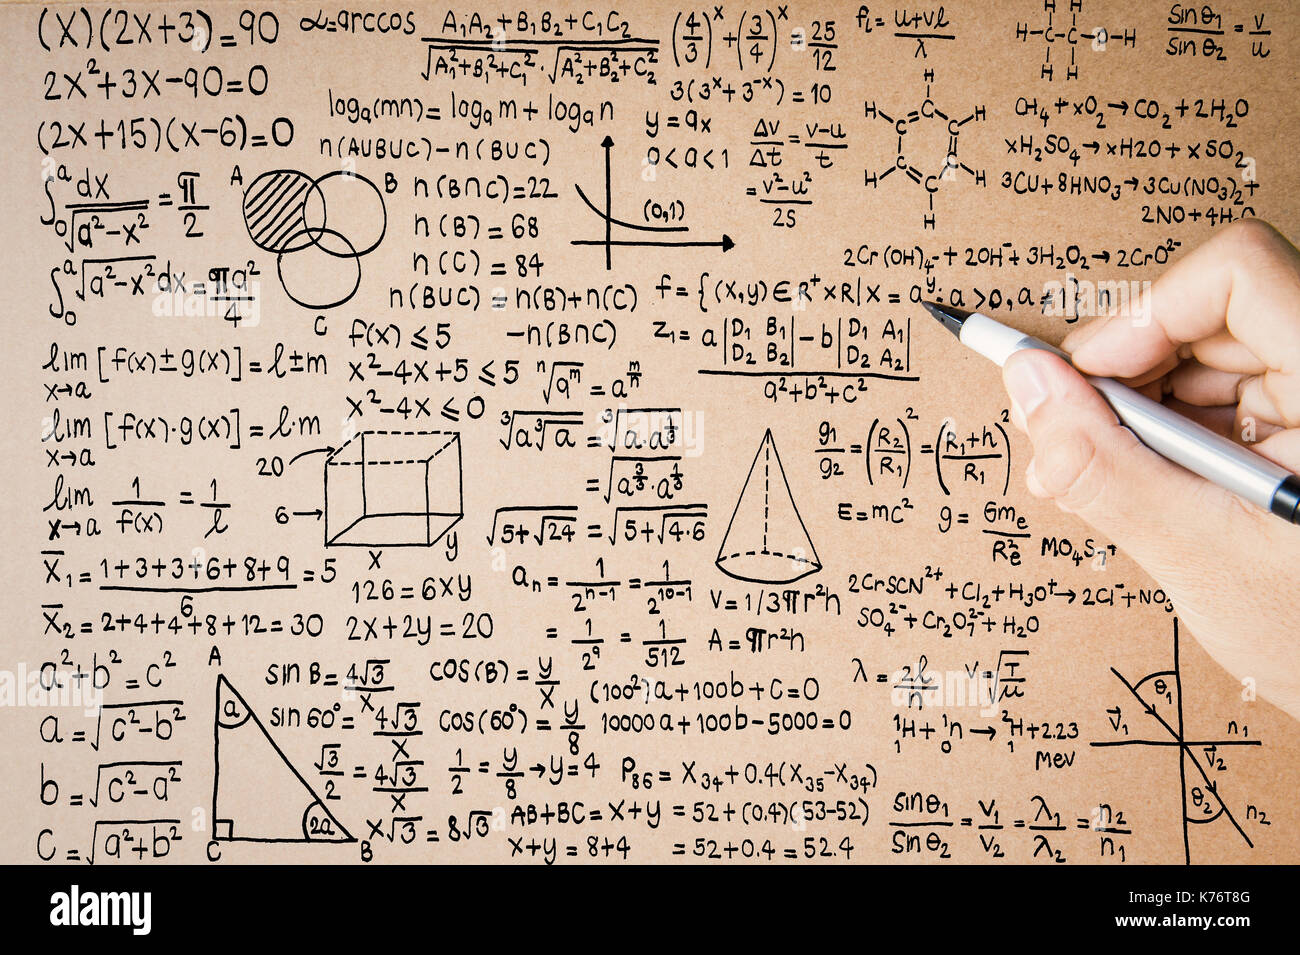 hand writing math formula on brown paper or education background Stock  Photo - Alamy